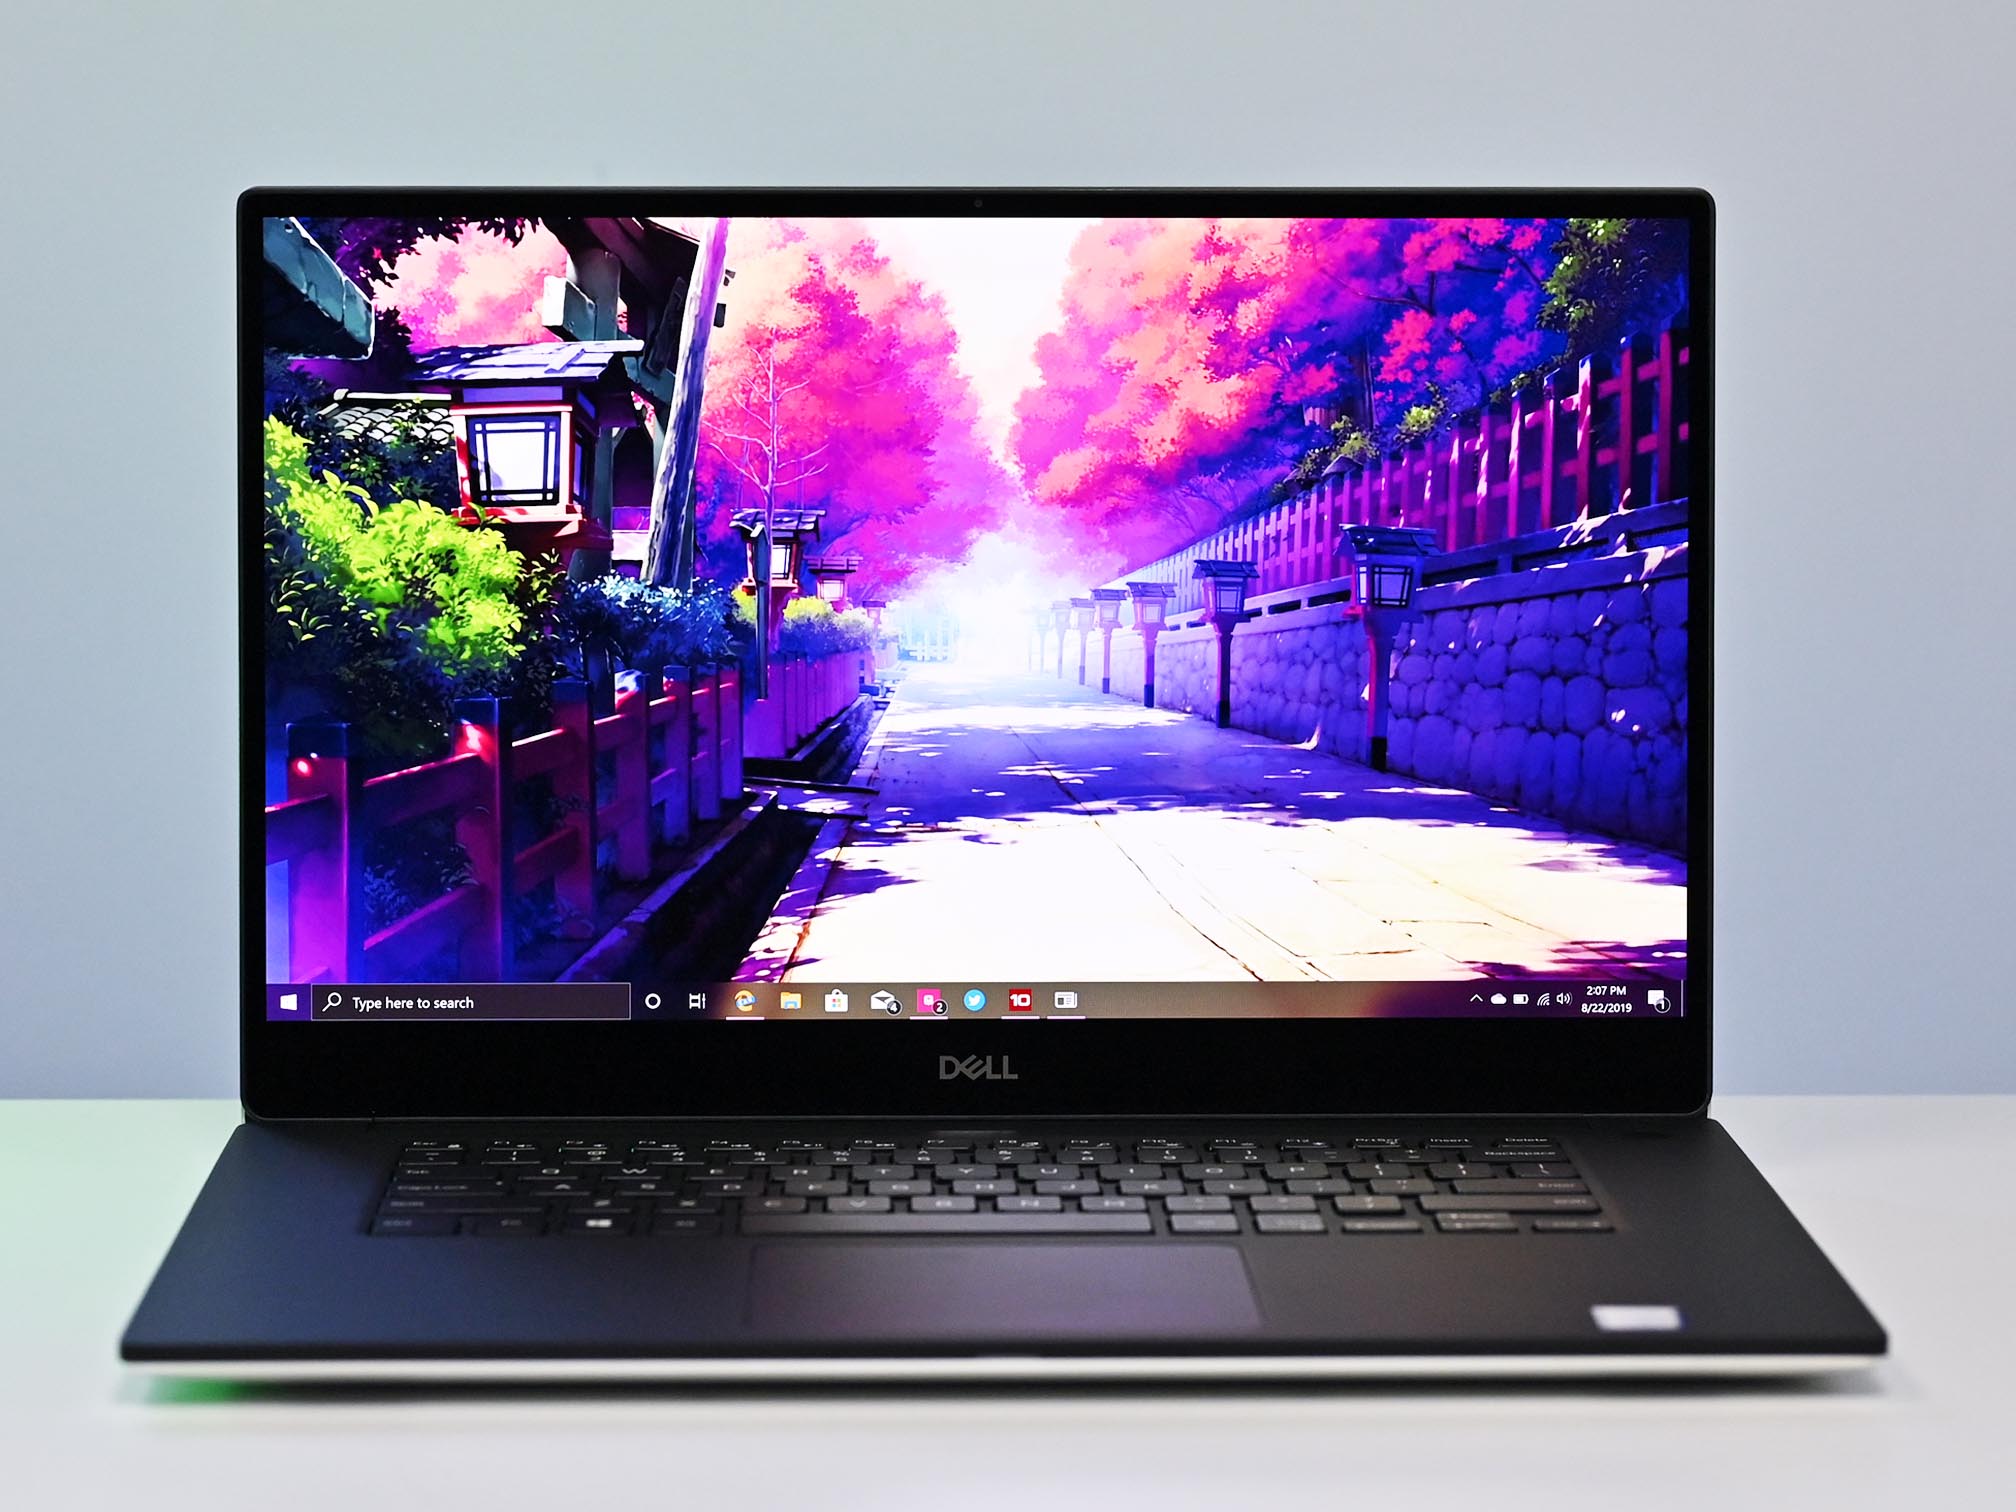 Dell XPS 15 (7590) review: The king of 15-inch laptops retains its crown